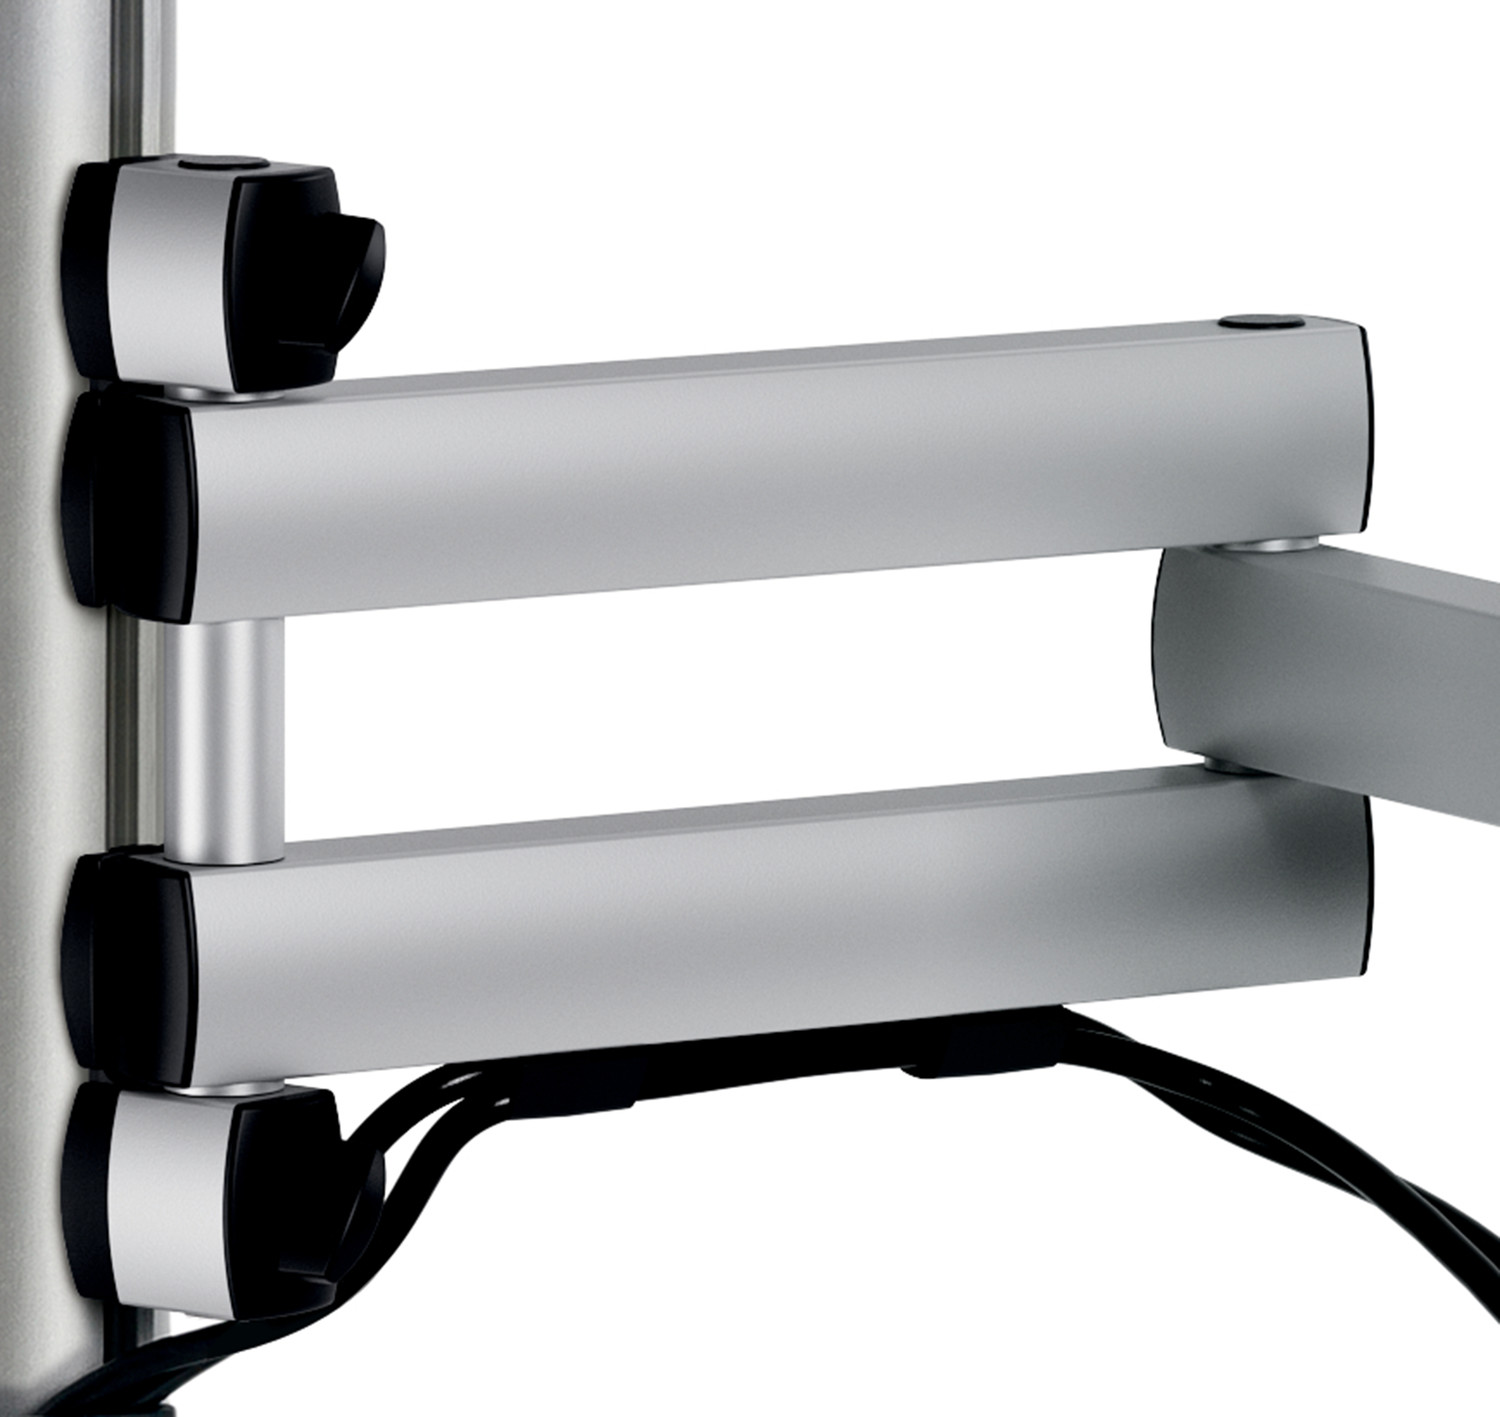 the cable holder in the folding arm ensures a safe and tidy cable management